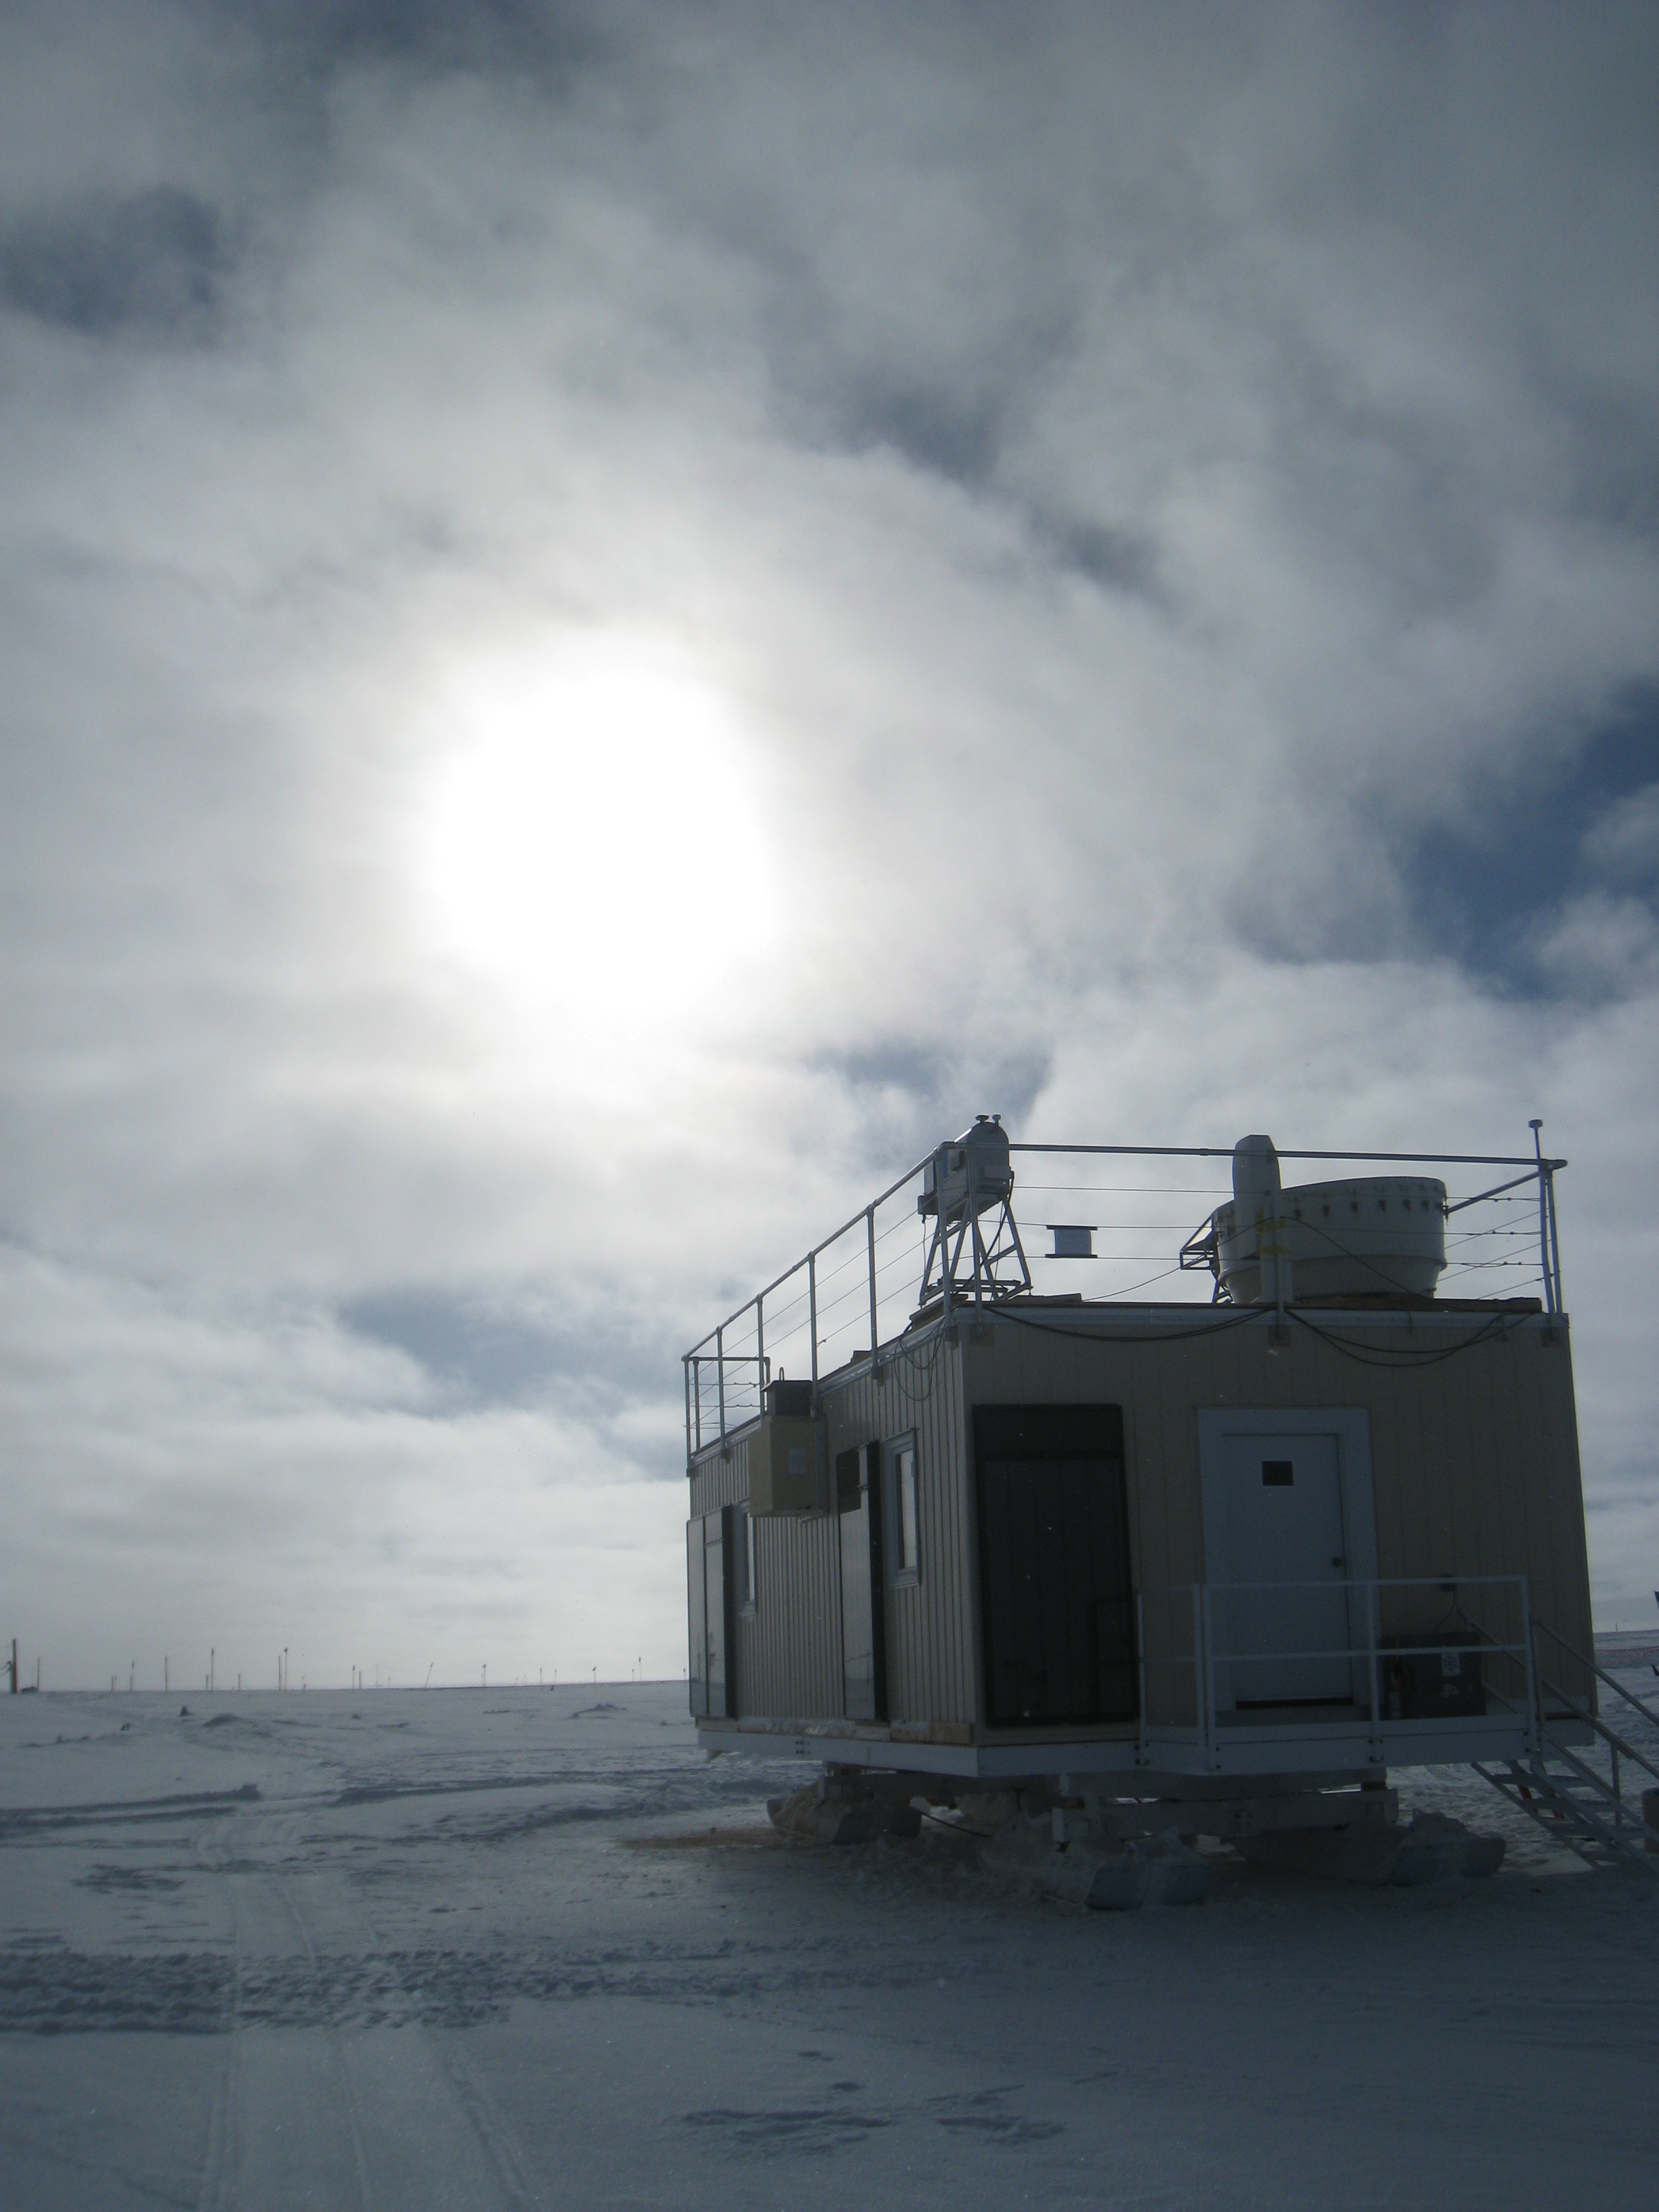 NSSL, partners: Thin, low Arctic clouds played an important role in the massive 2012 Greenland ice melt